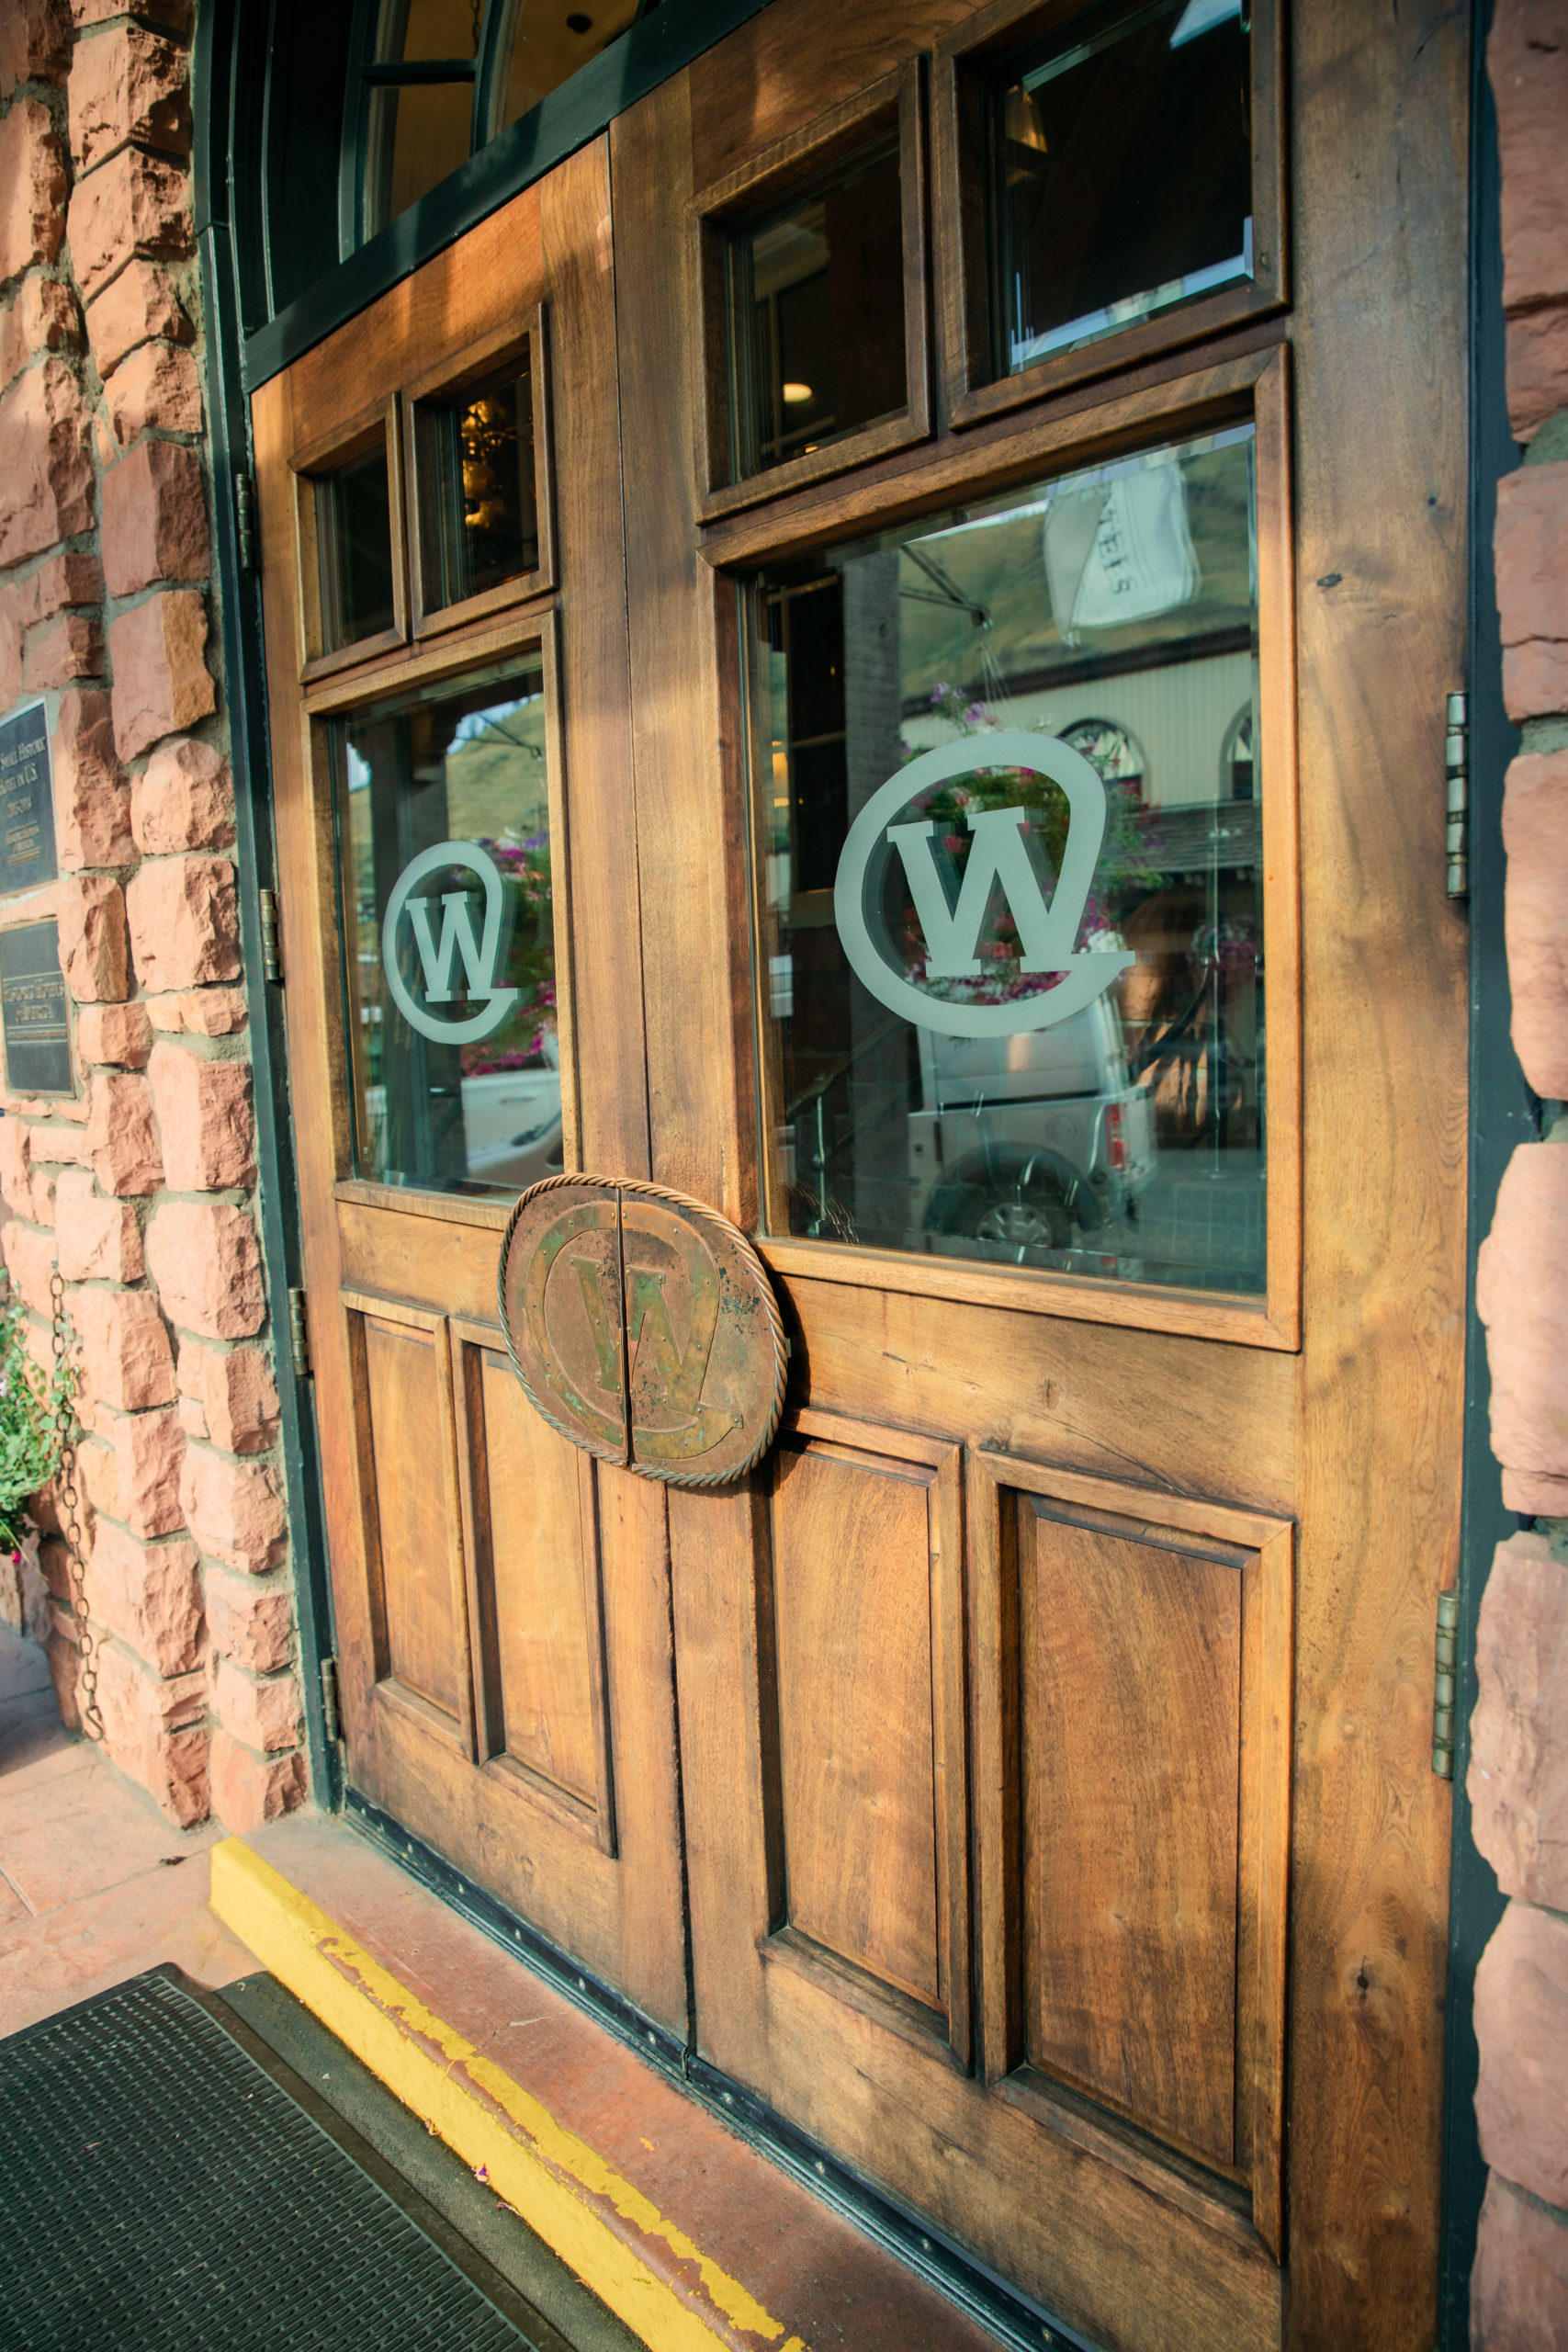 Doors with The Wort logo frosted into the windows. Doors have giant semi-circle handles.